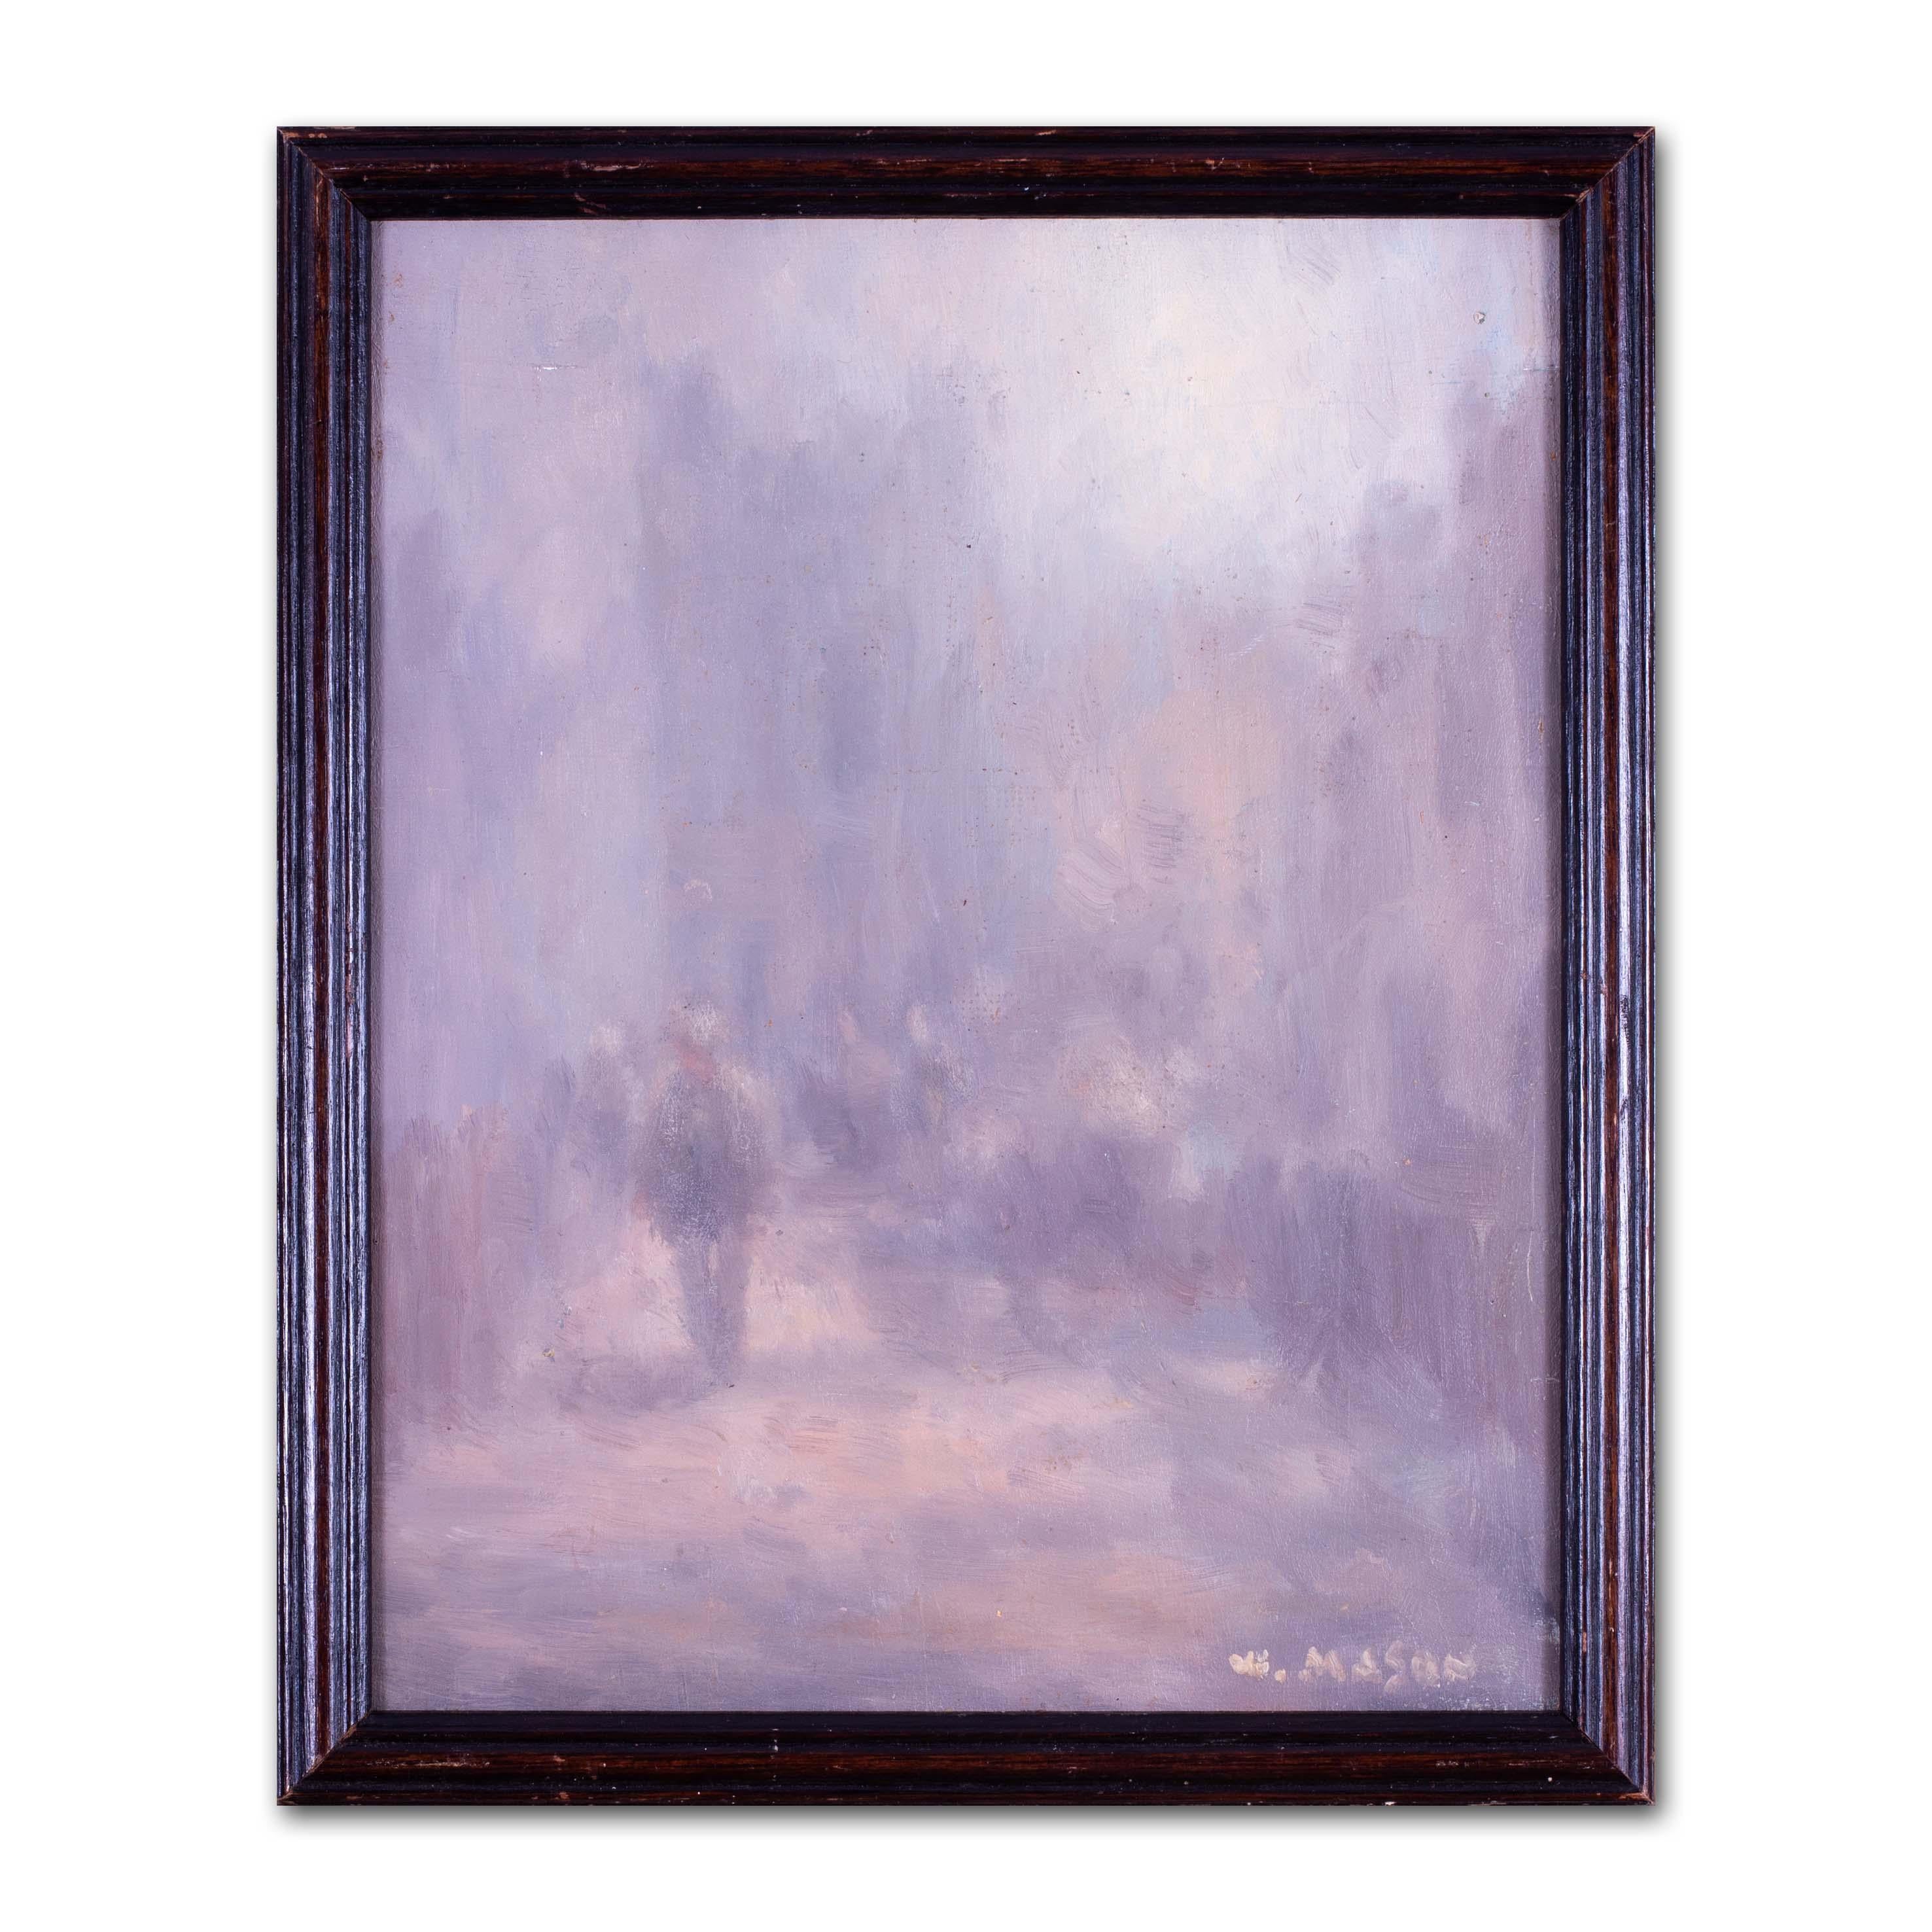 British Impressionist painting of figures in the mist by William Mason 4